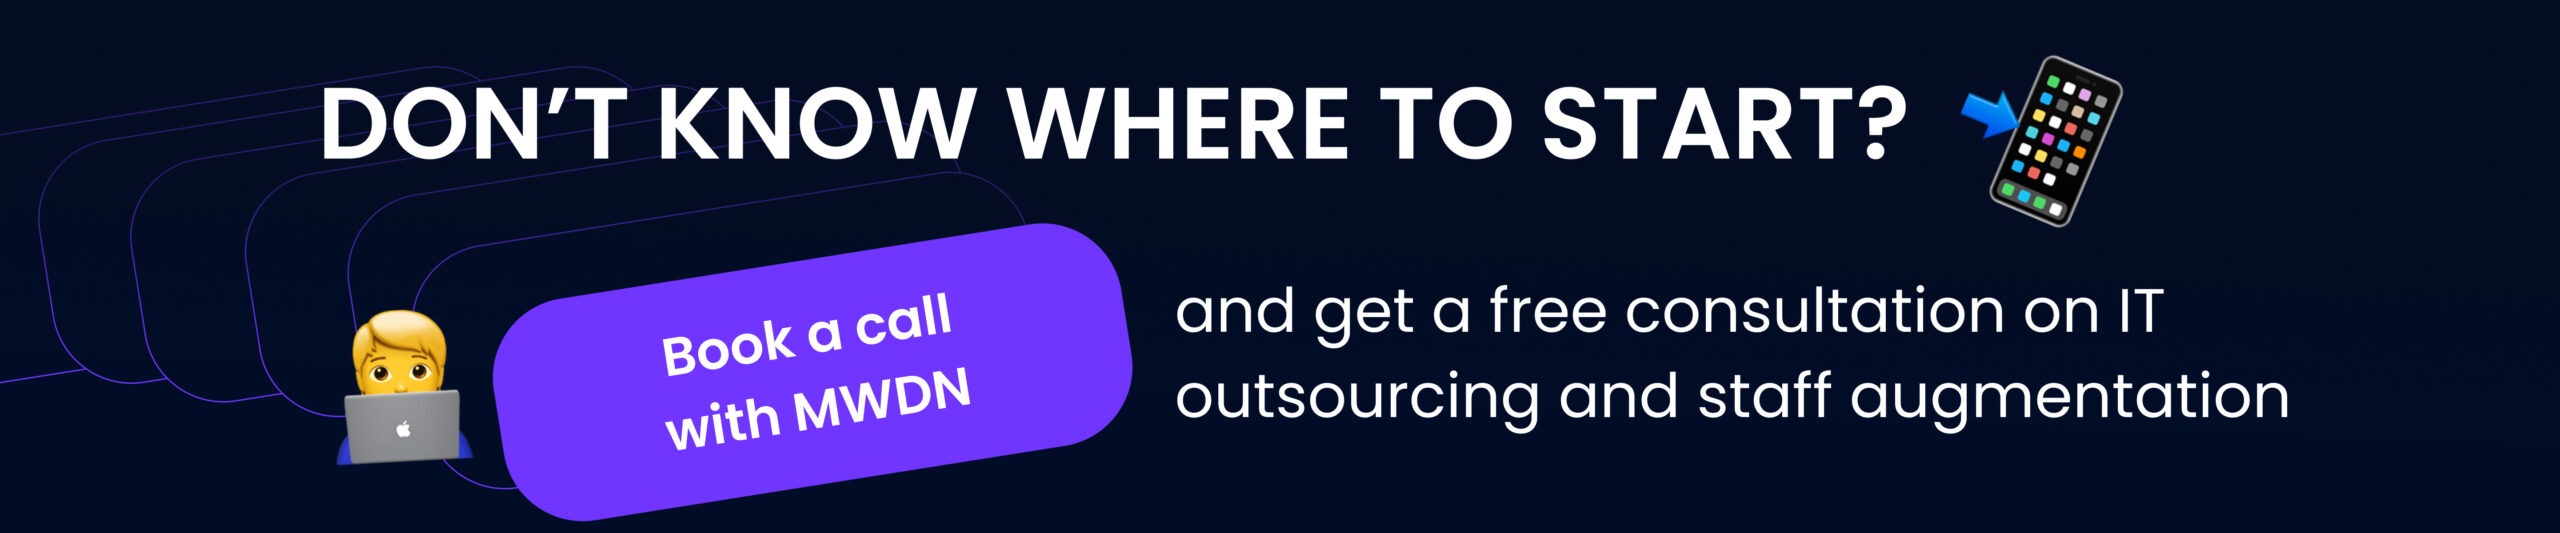 IT outsourcing free consultation